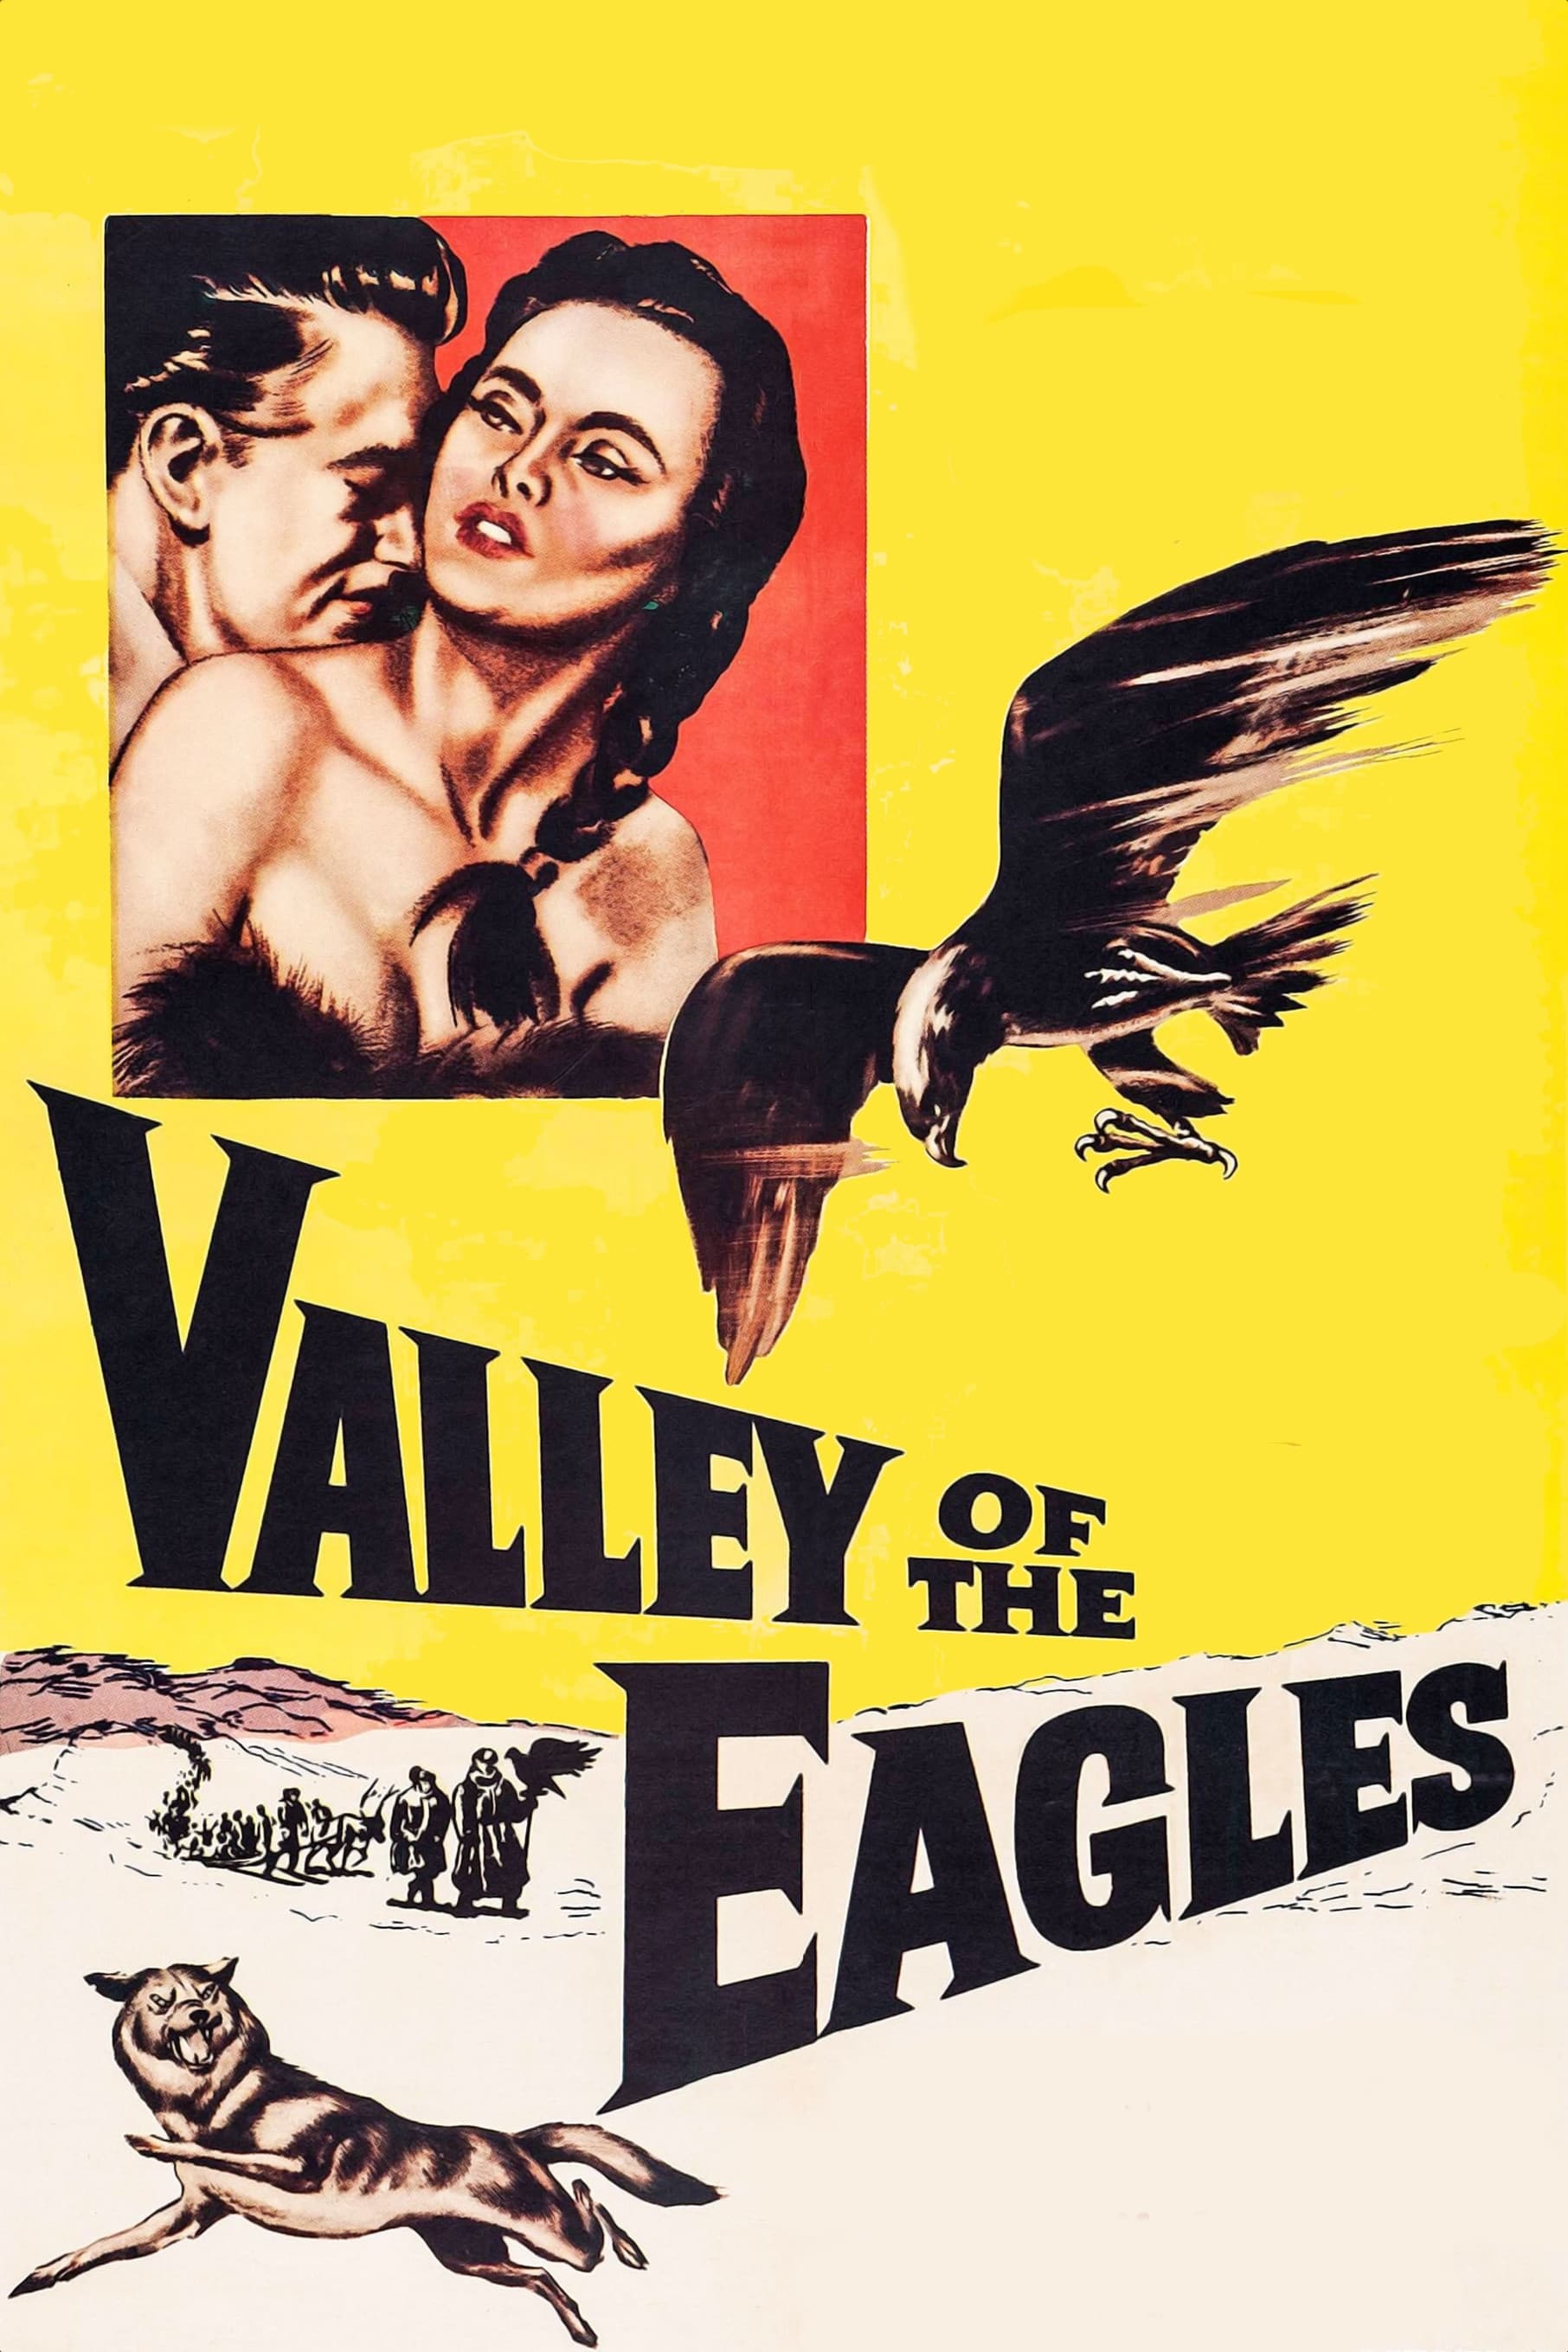 Valley of the Eagles (1951)